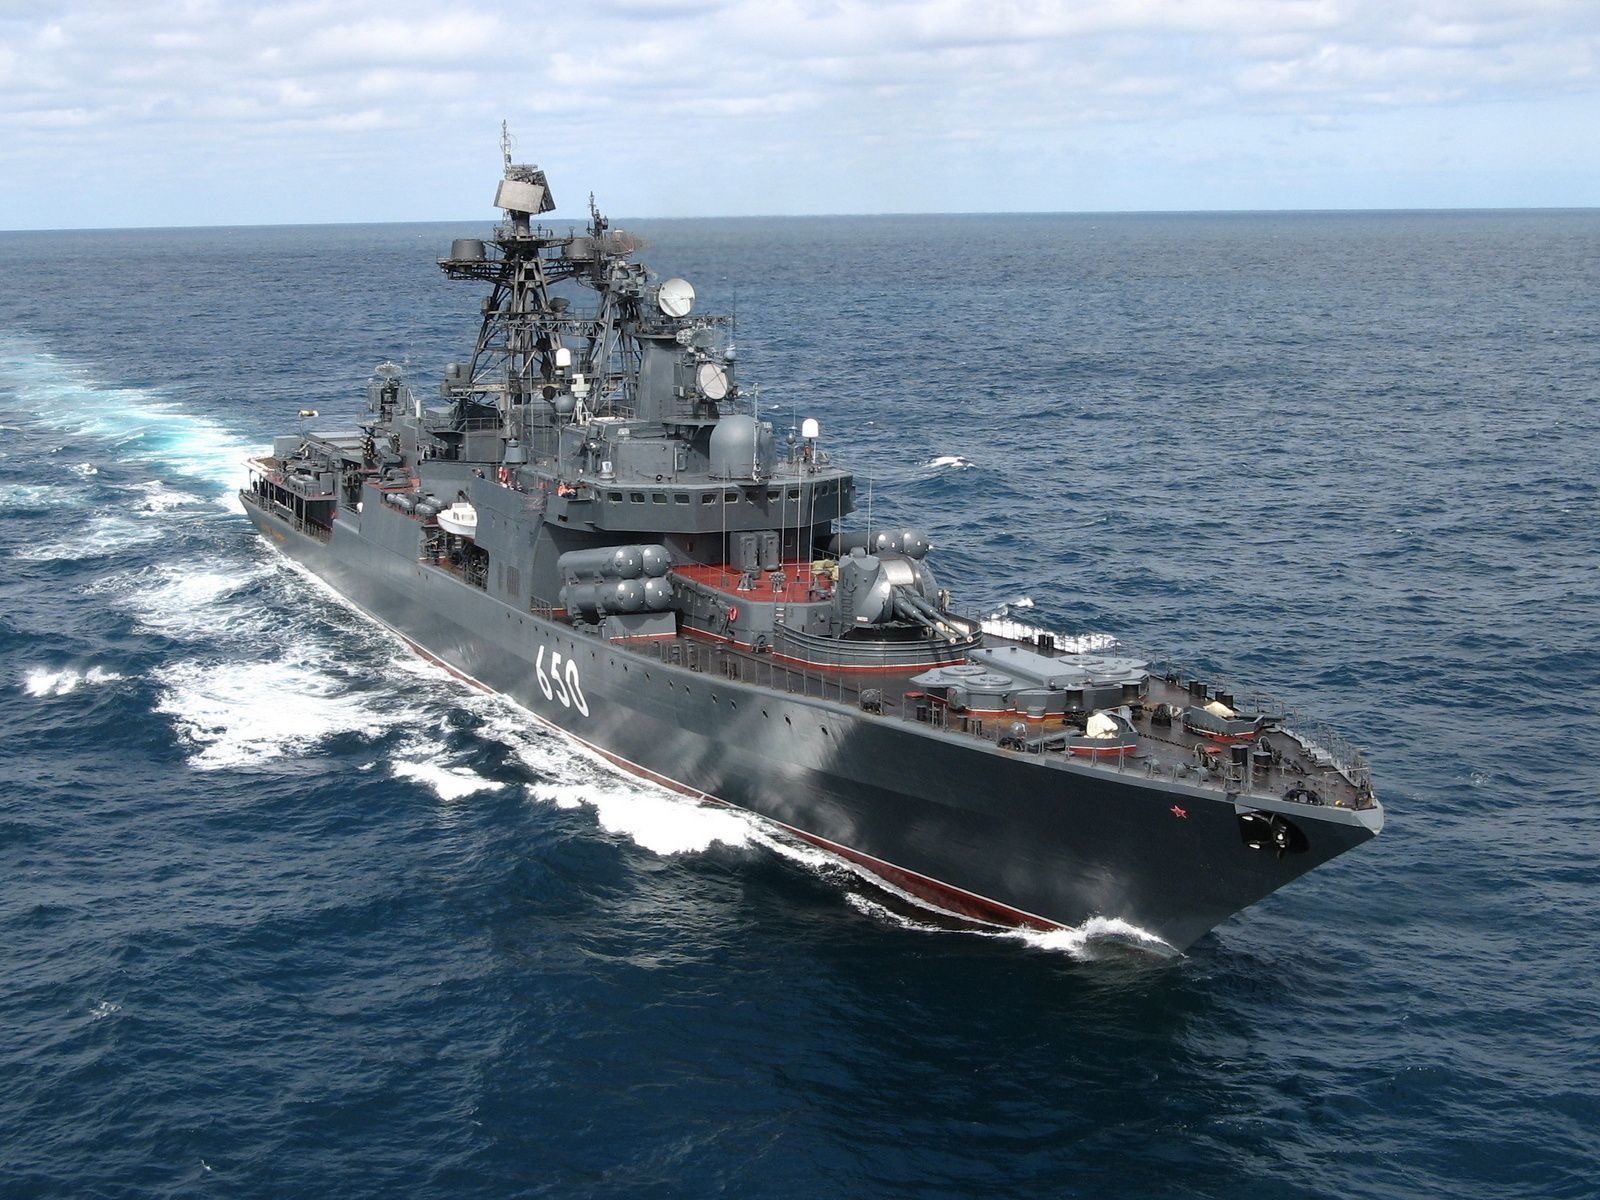 Why did the Russian Navy build the Udaloy-class destroyer? - Quora